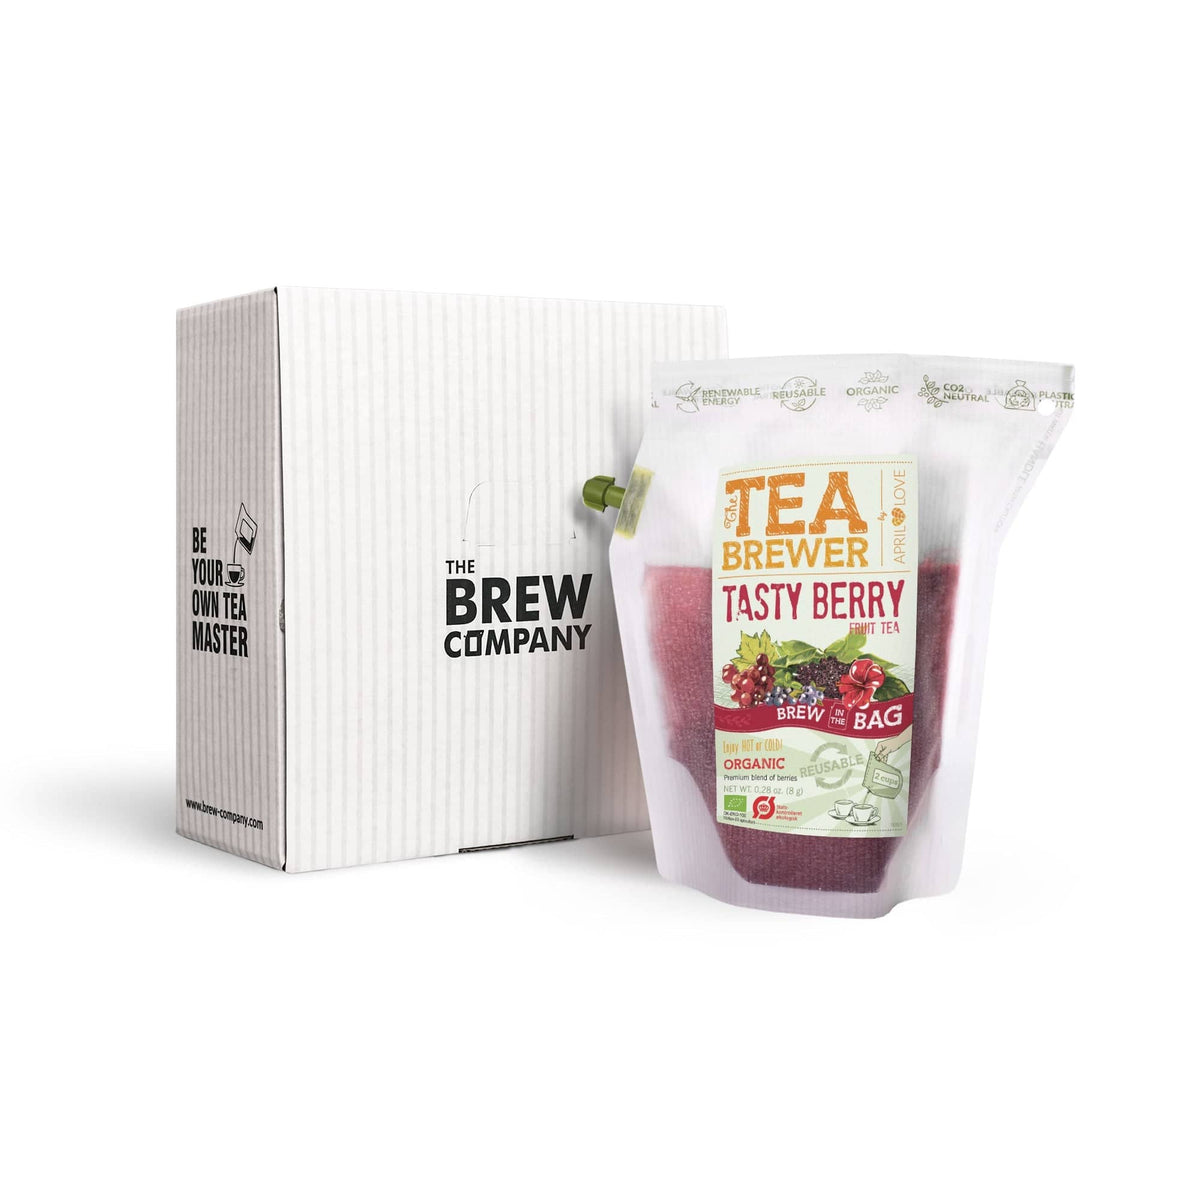 TASTY BERRY Teabrewers The Brew Company